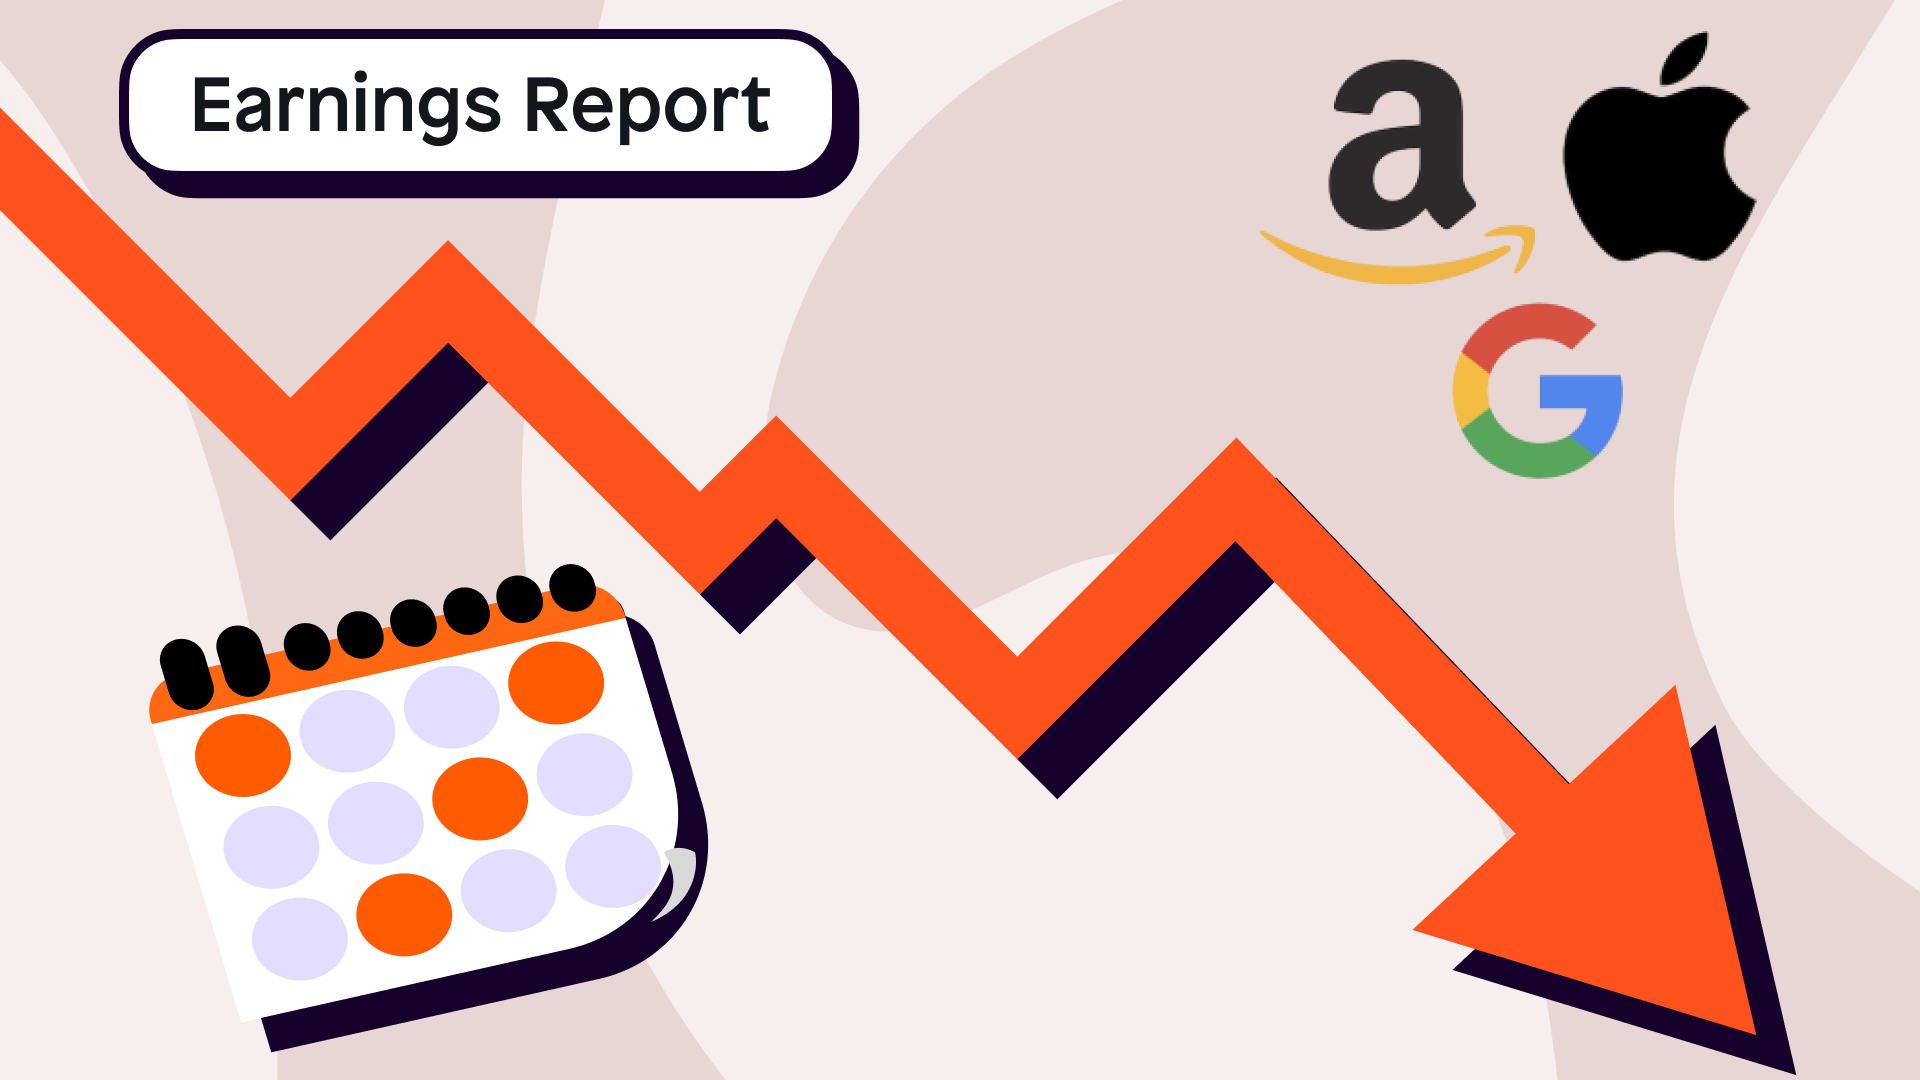 Apple, Amazon and Alphabet's earnings report